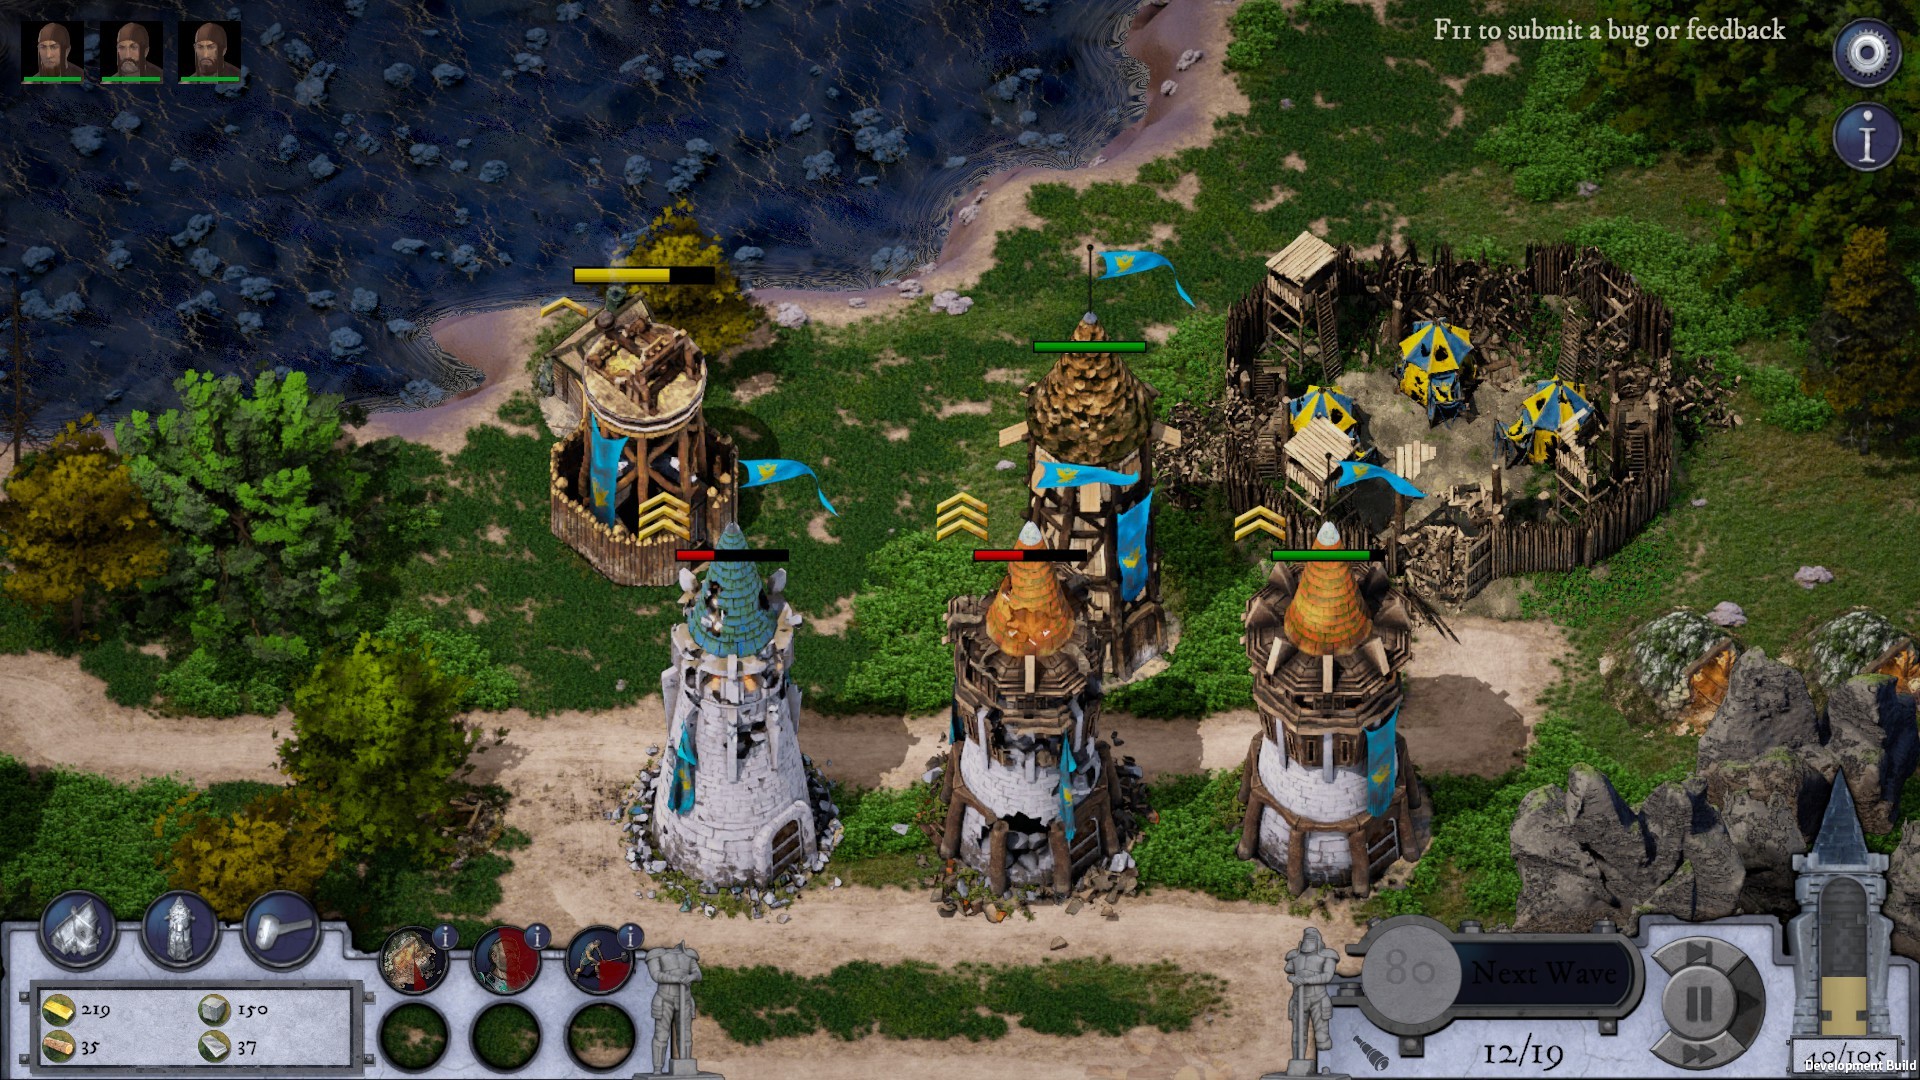 Empires in Ruins - 0849.02 Game Settings - Steam News